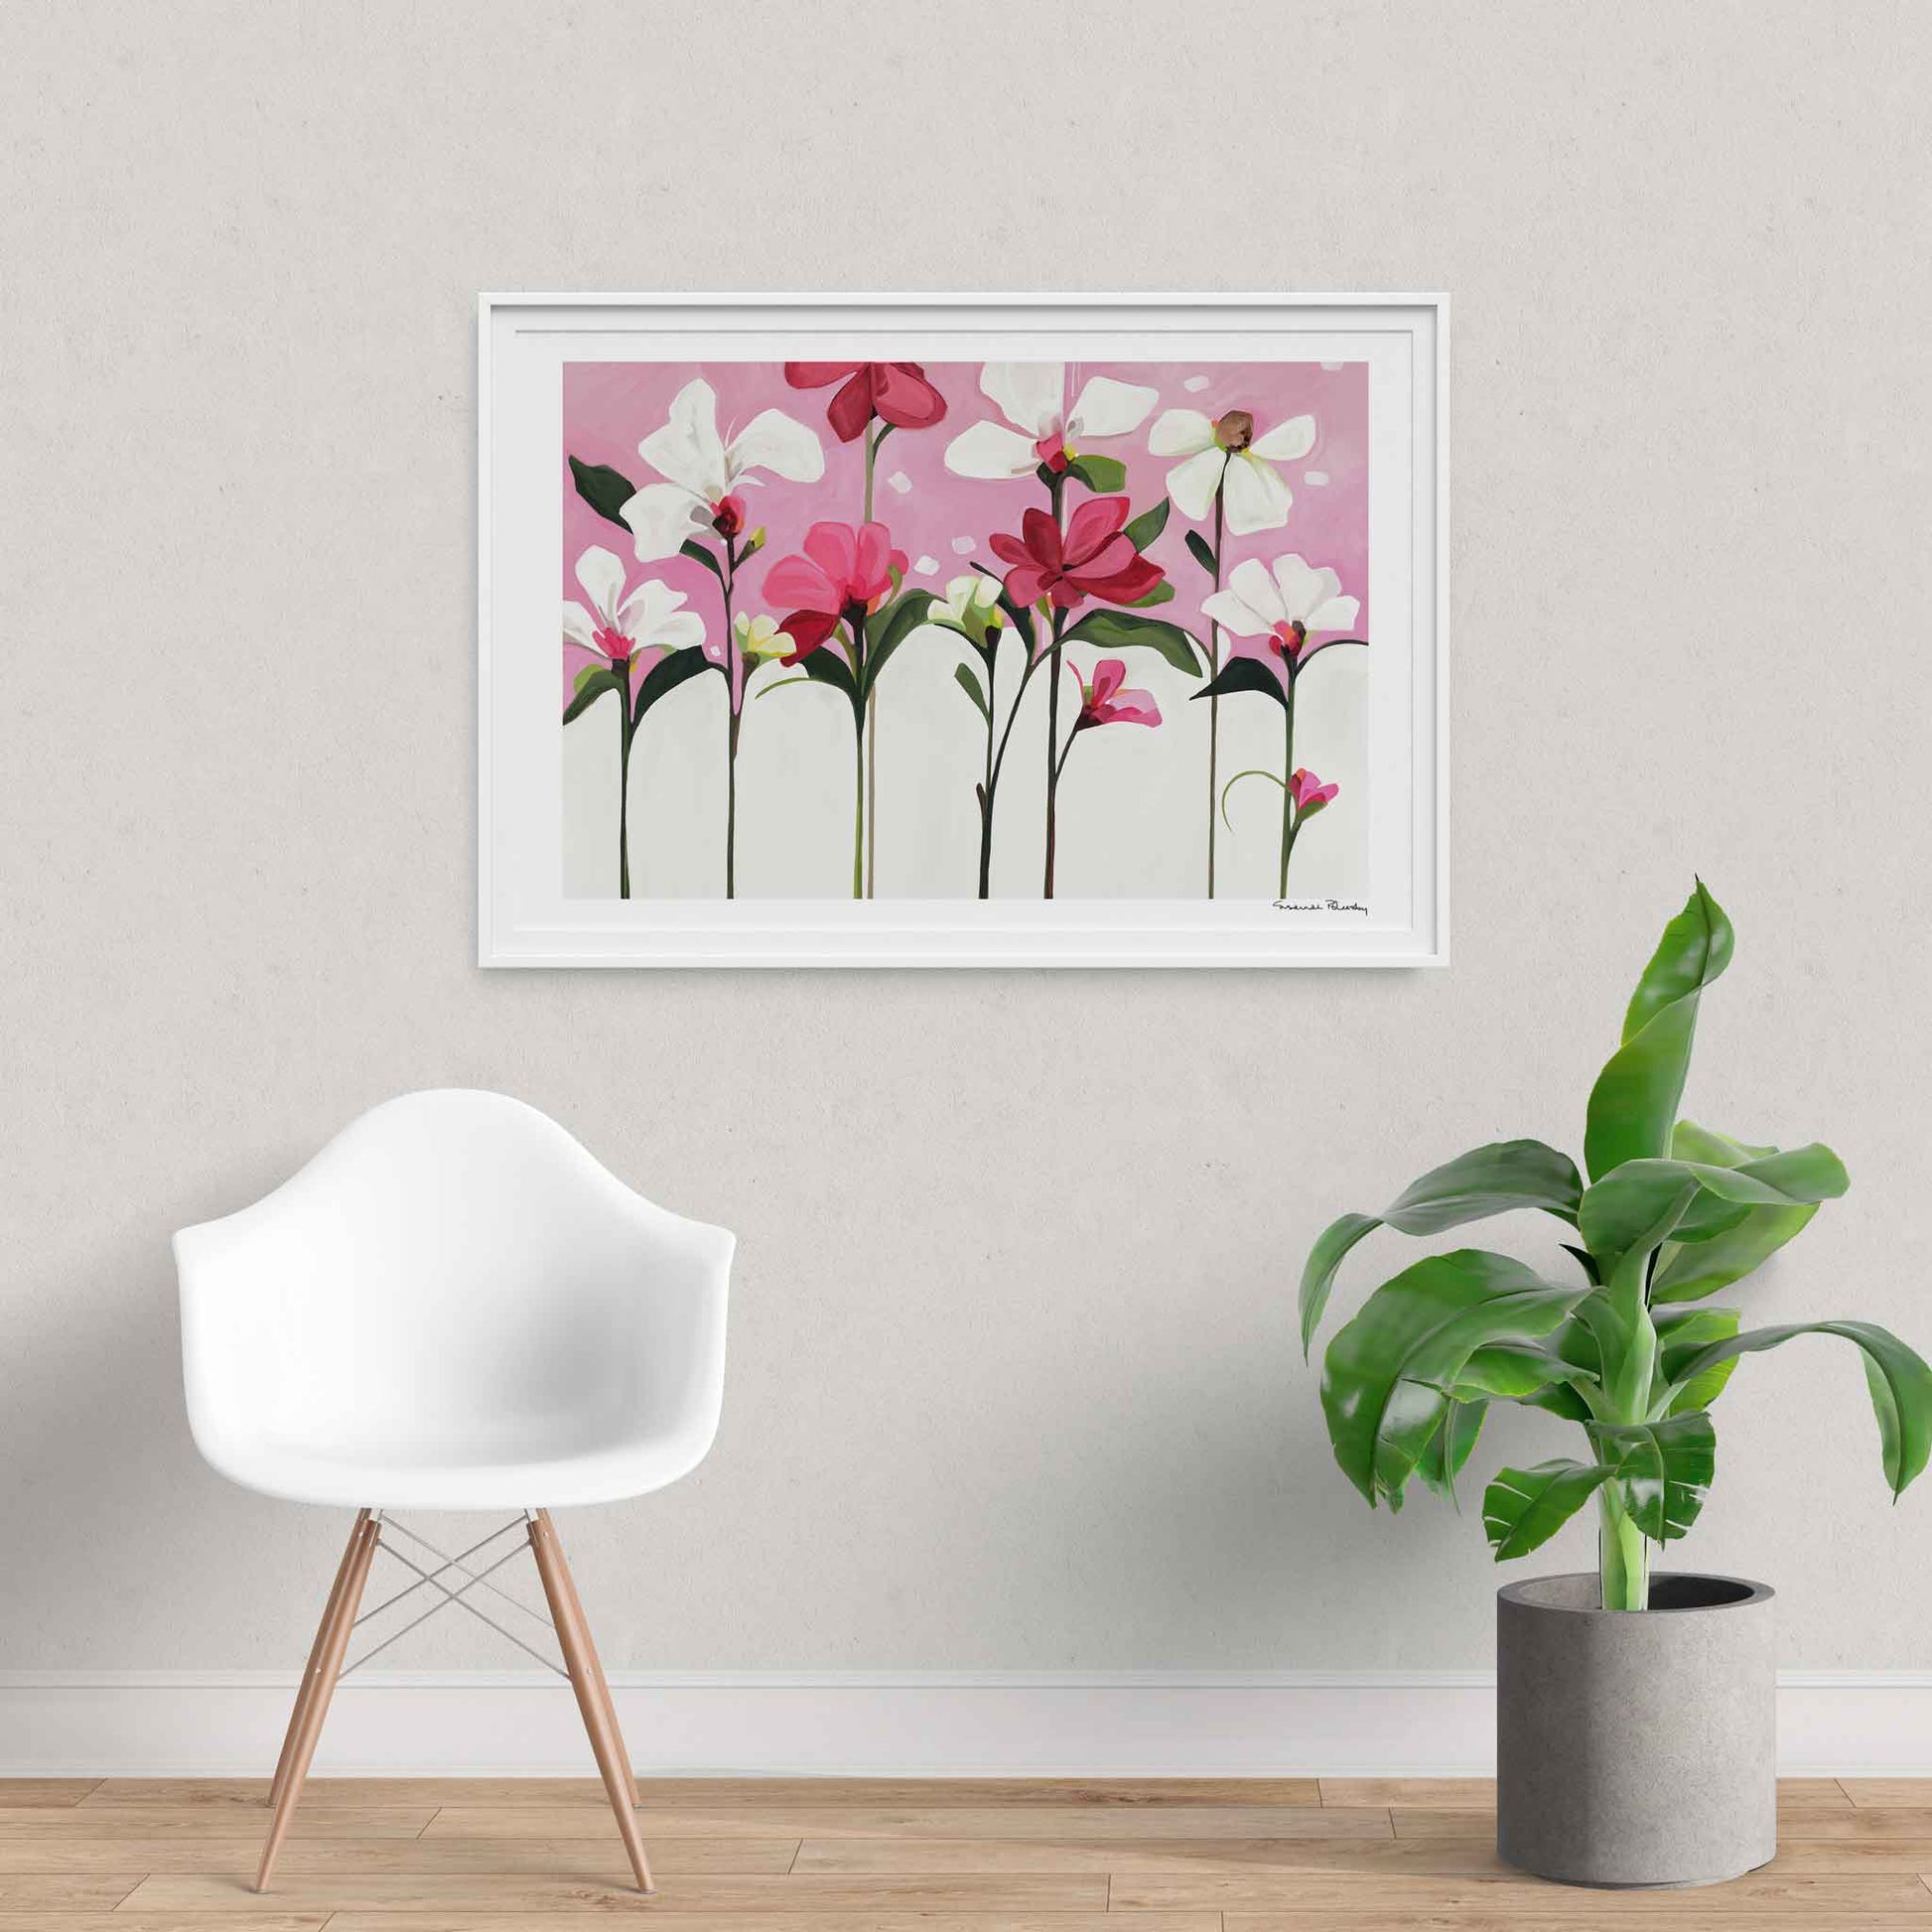 magenta pink and white flowers showcased in a large horizontal art print created from an acrylic flower painting